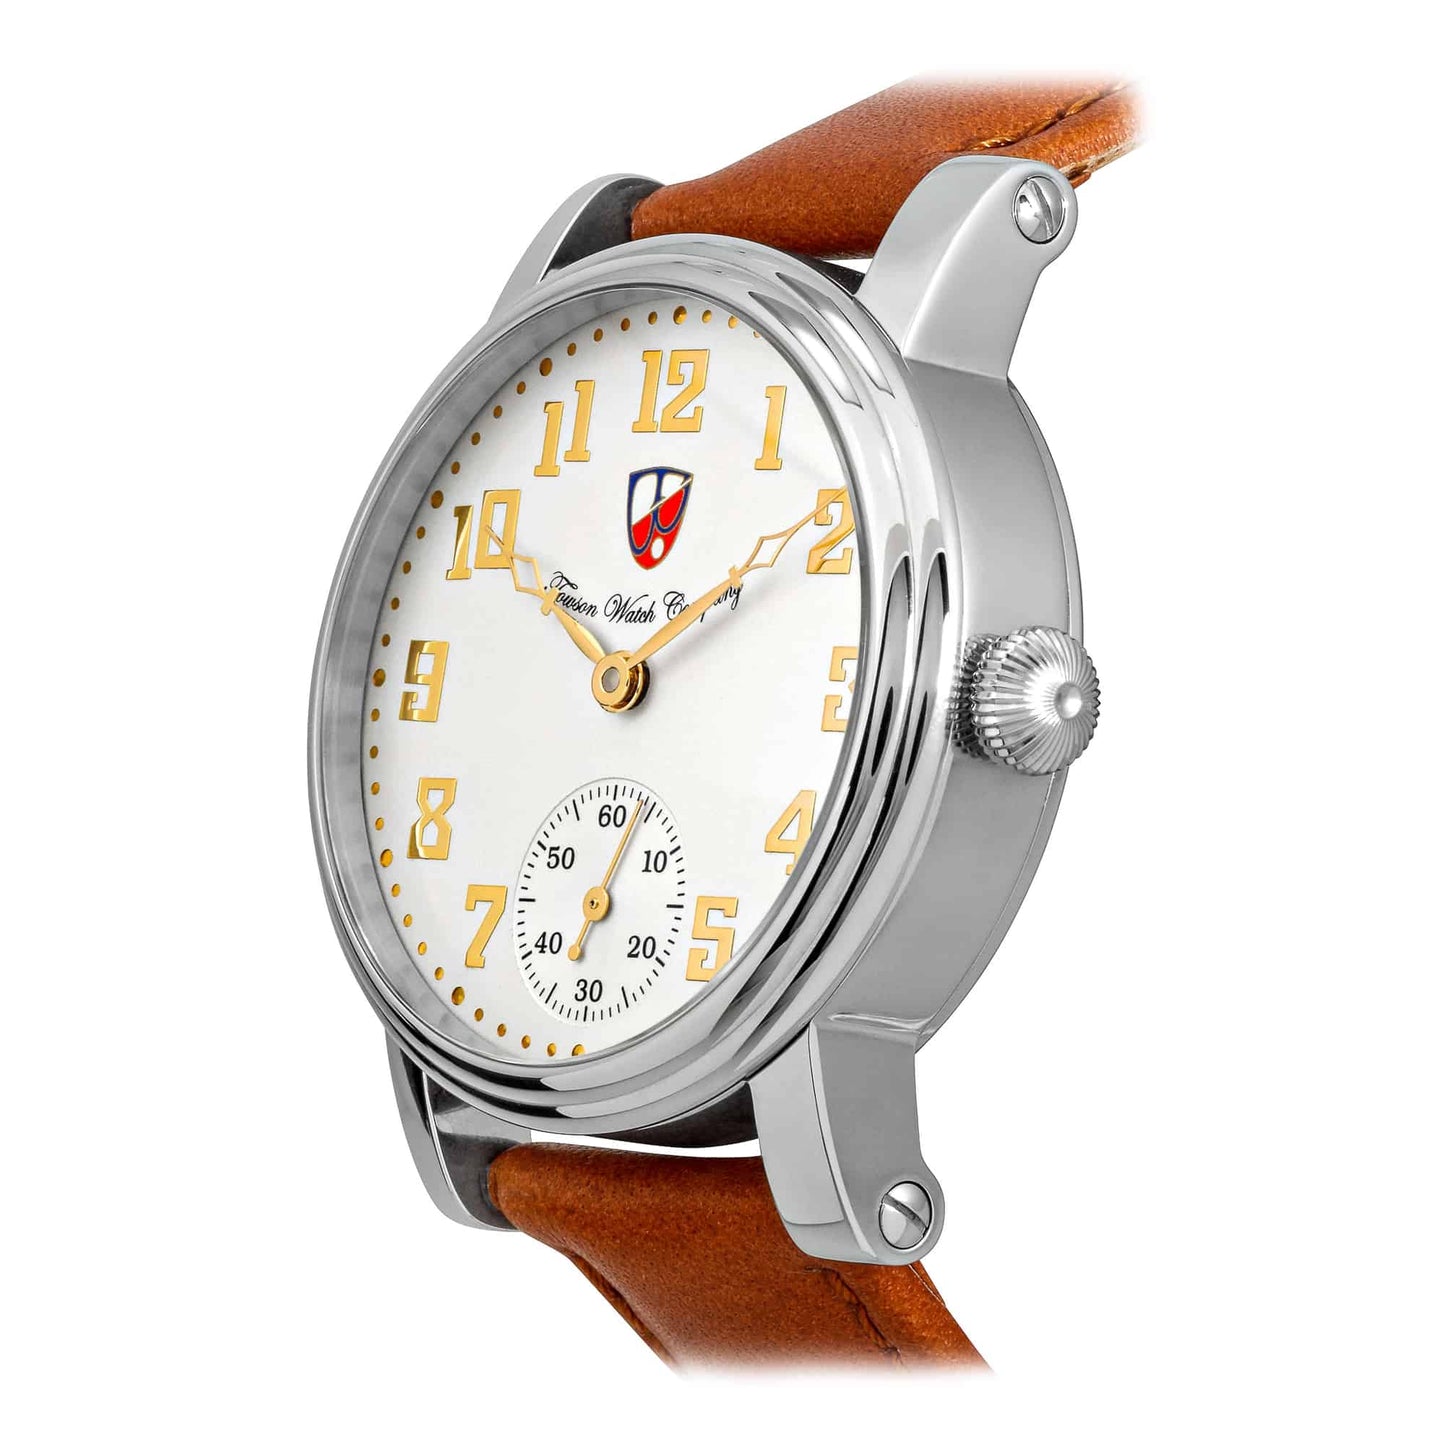 Towson Watch Company - Potomac. Limited Collection - Maple City Timepieces